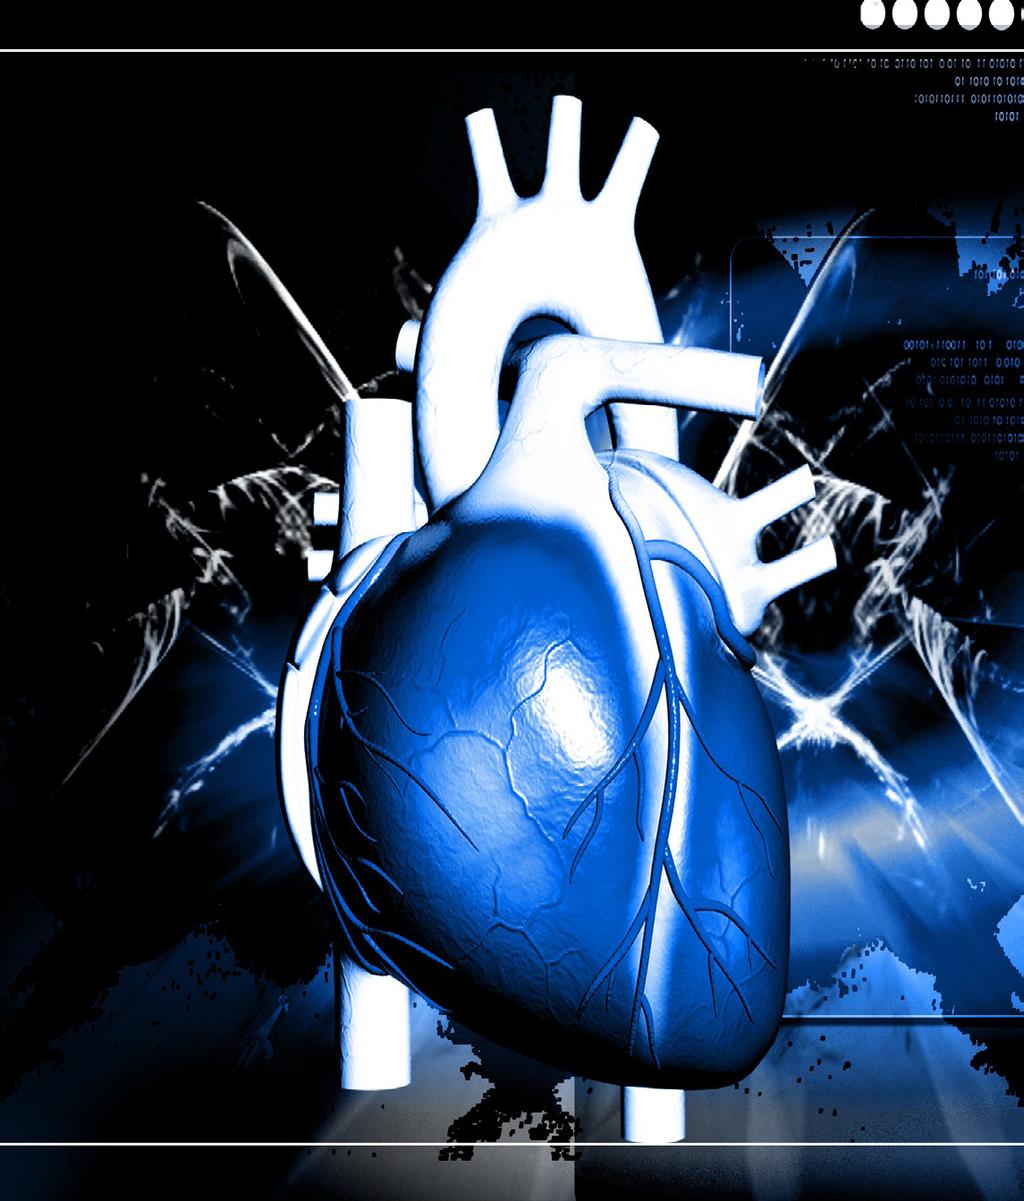 Prominent scientific sessions: Advances in Cardiology Education Current Research in Cardiology Paediatric Cardiology Cardiac Diagnostic & Tests Women